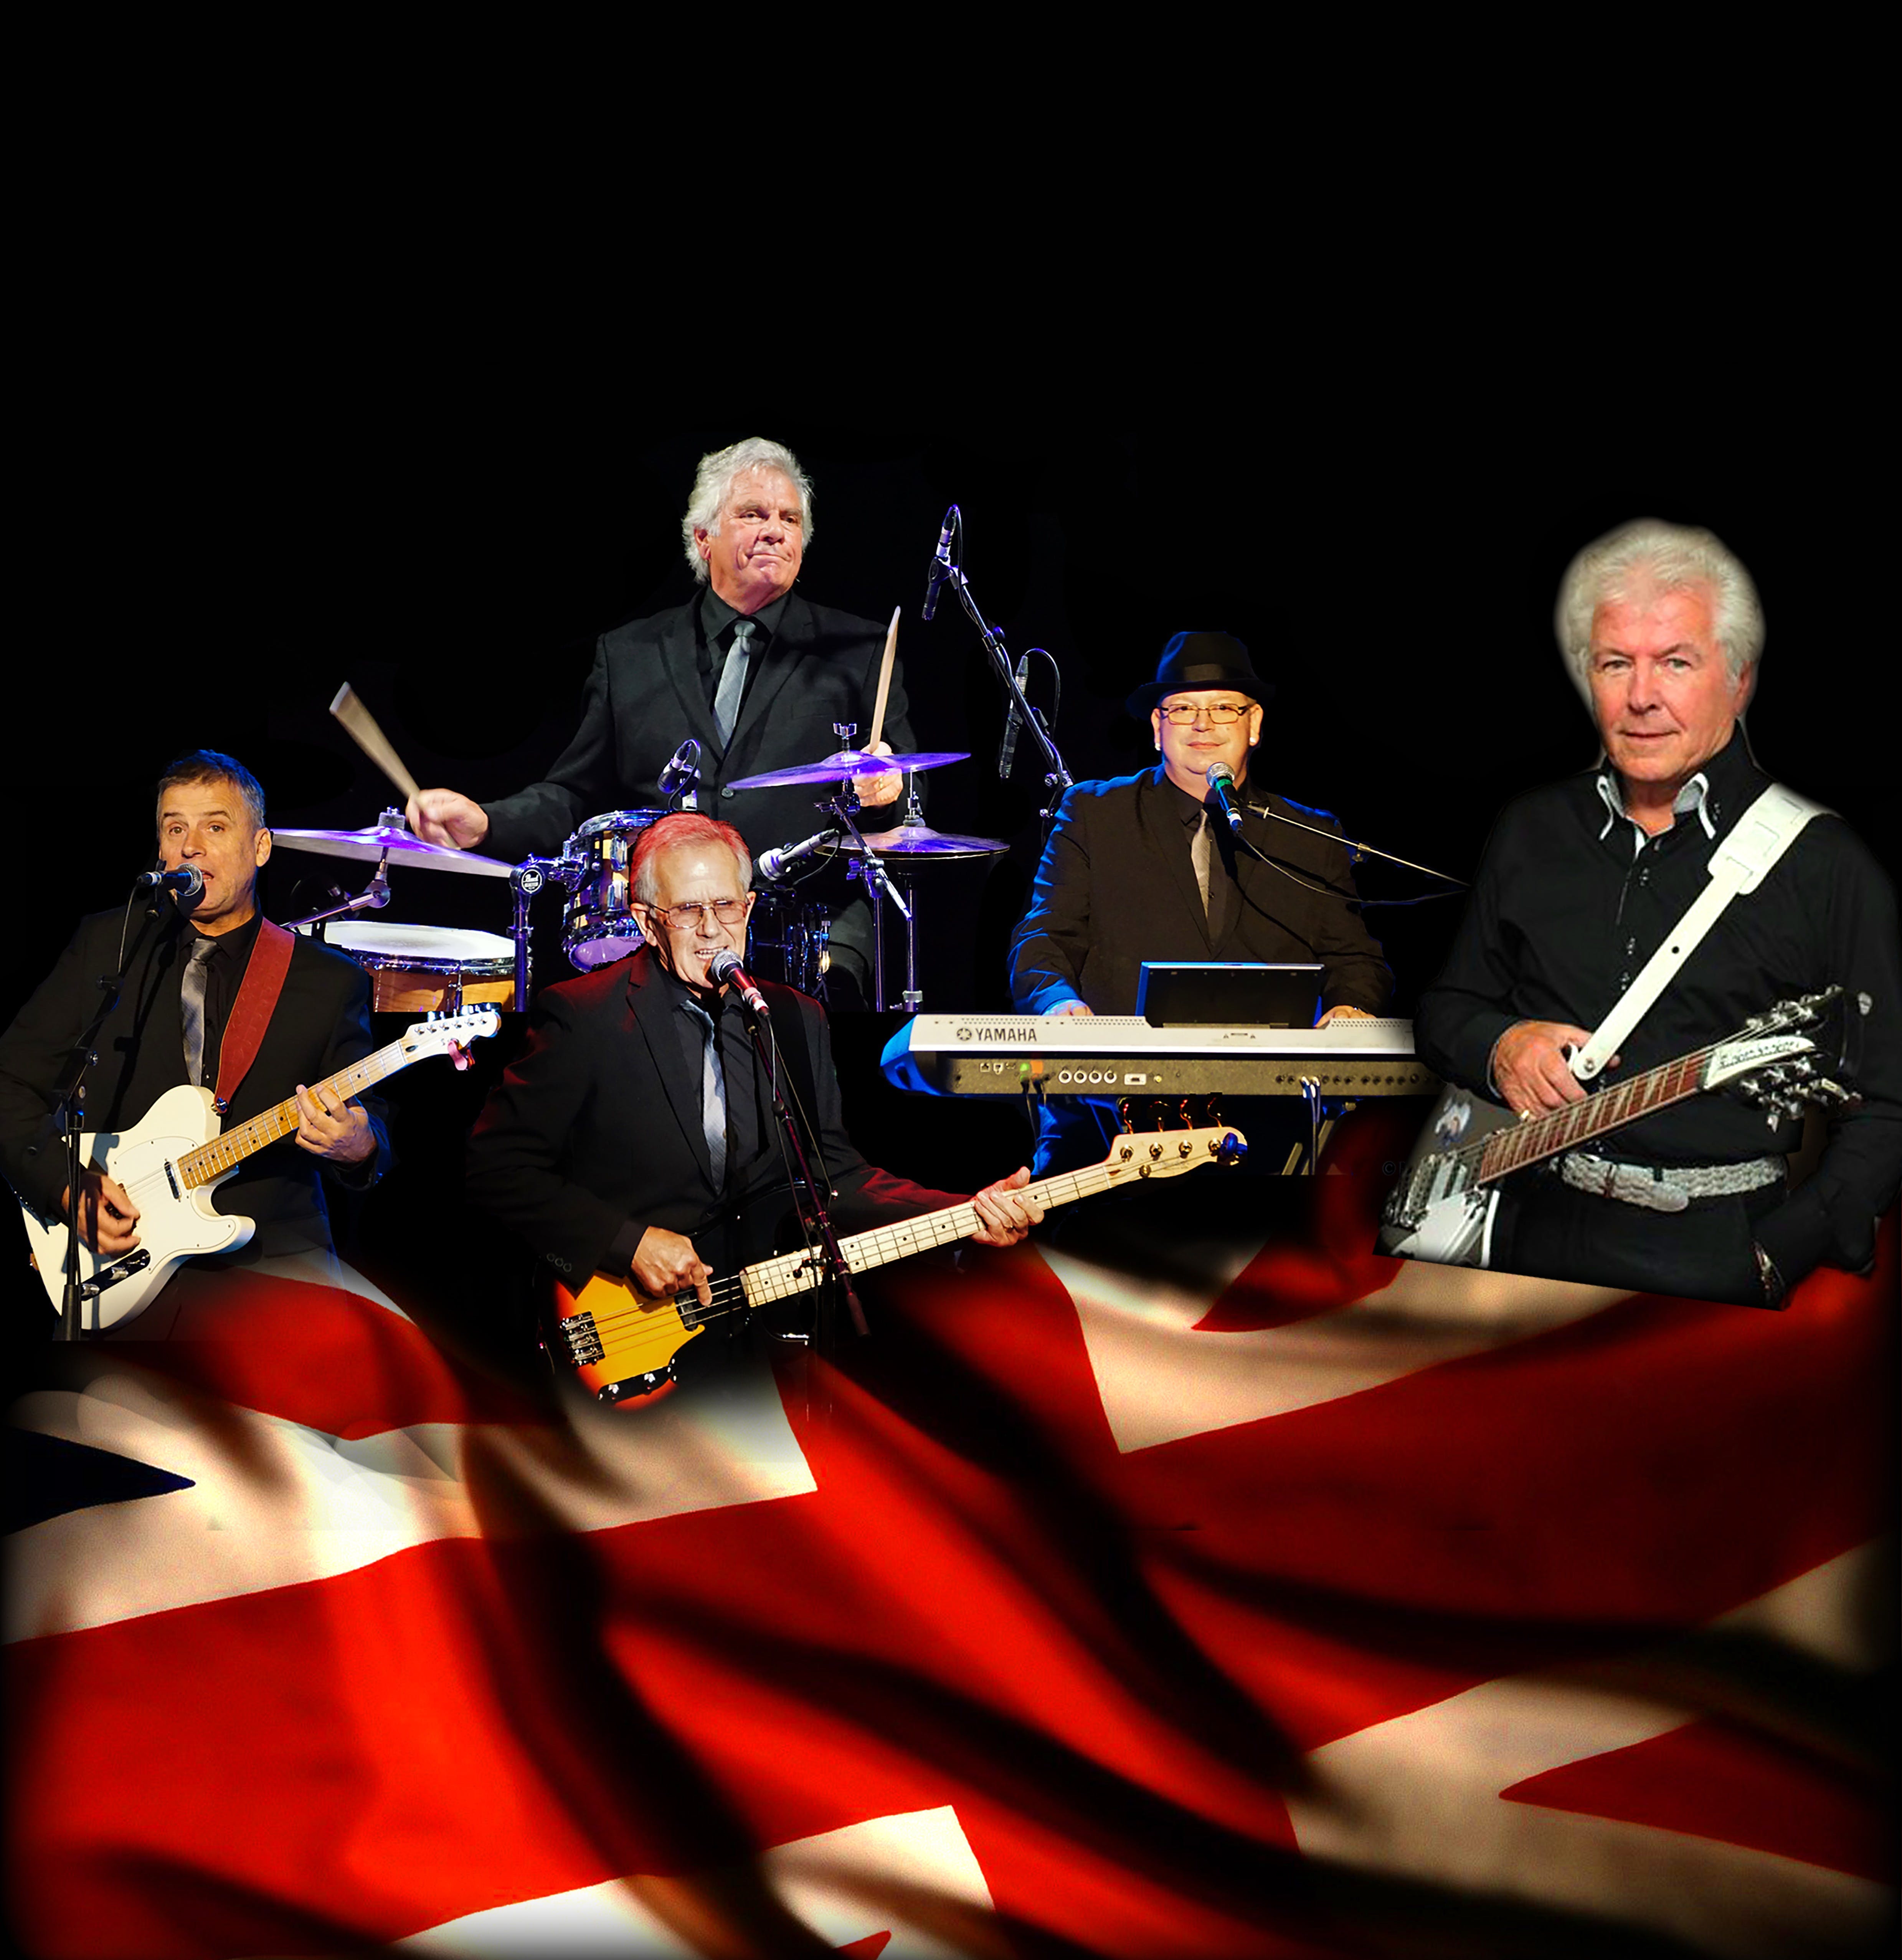 Herman's Hermits with Special Guest Mike Pender - The Six O'Clock Hop - C Tourism